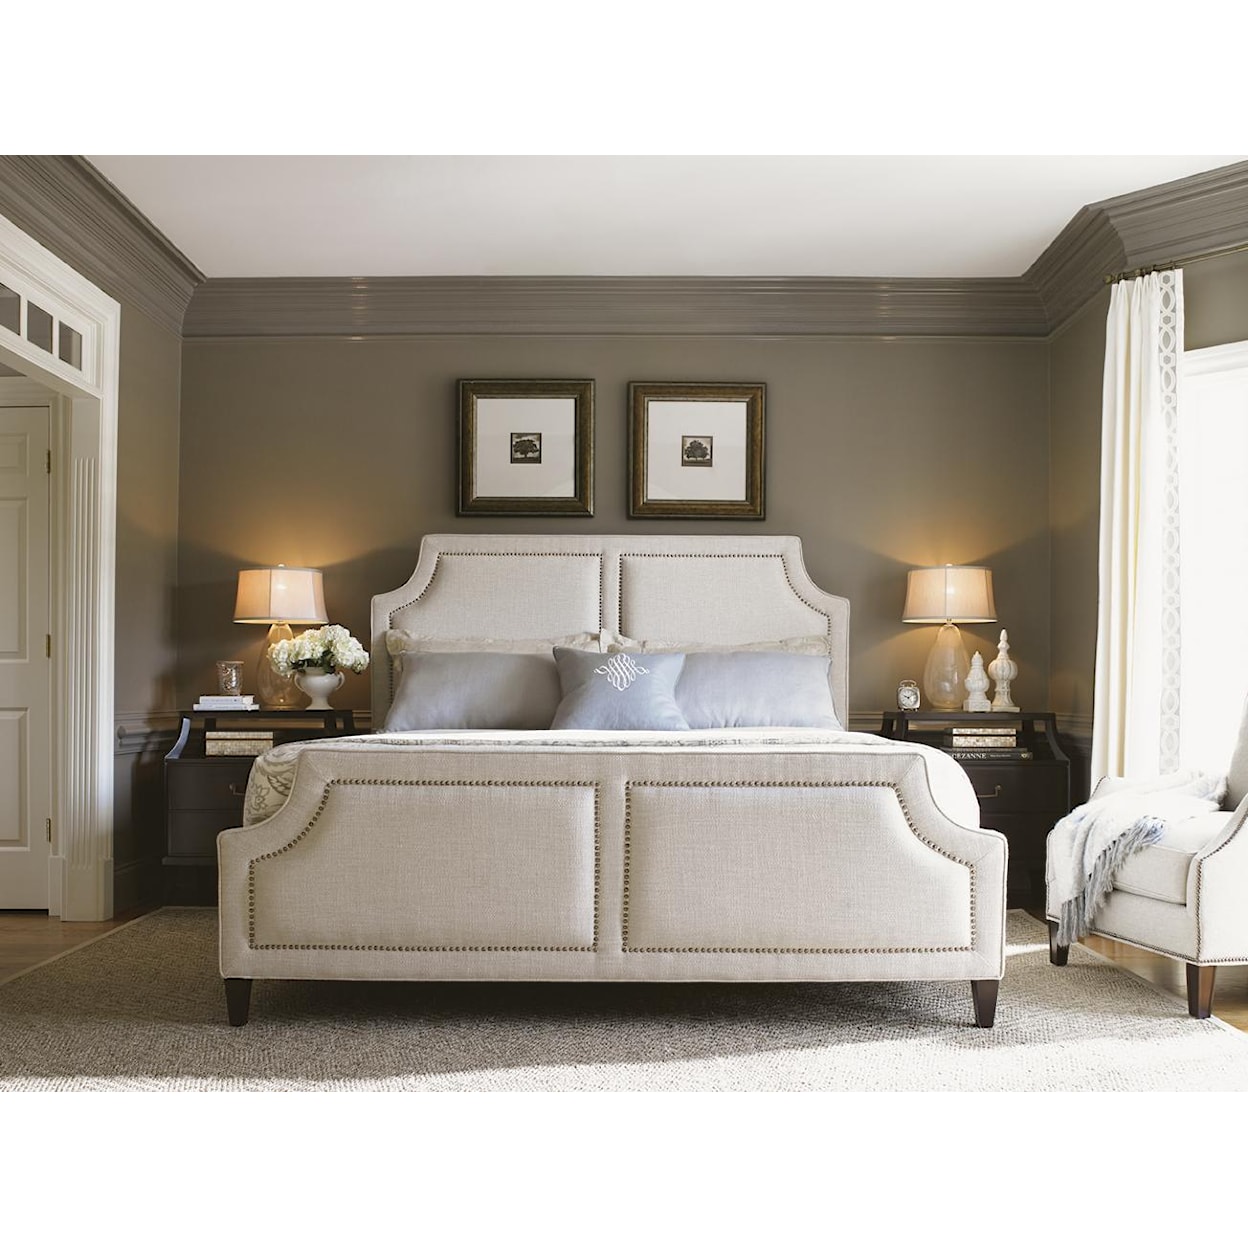 Lexington Kensington Place Queen Chadwick Upholstered Bed